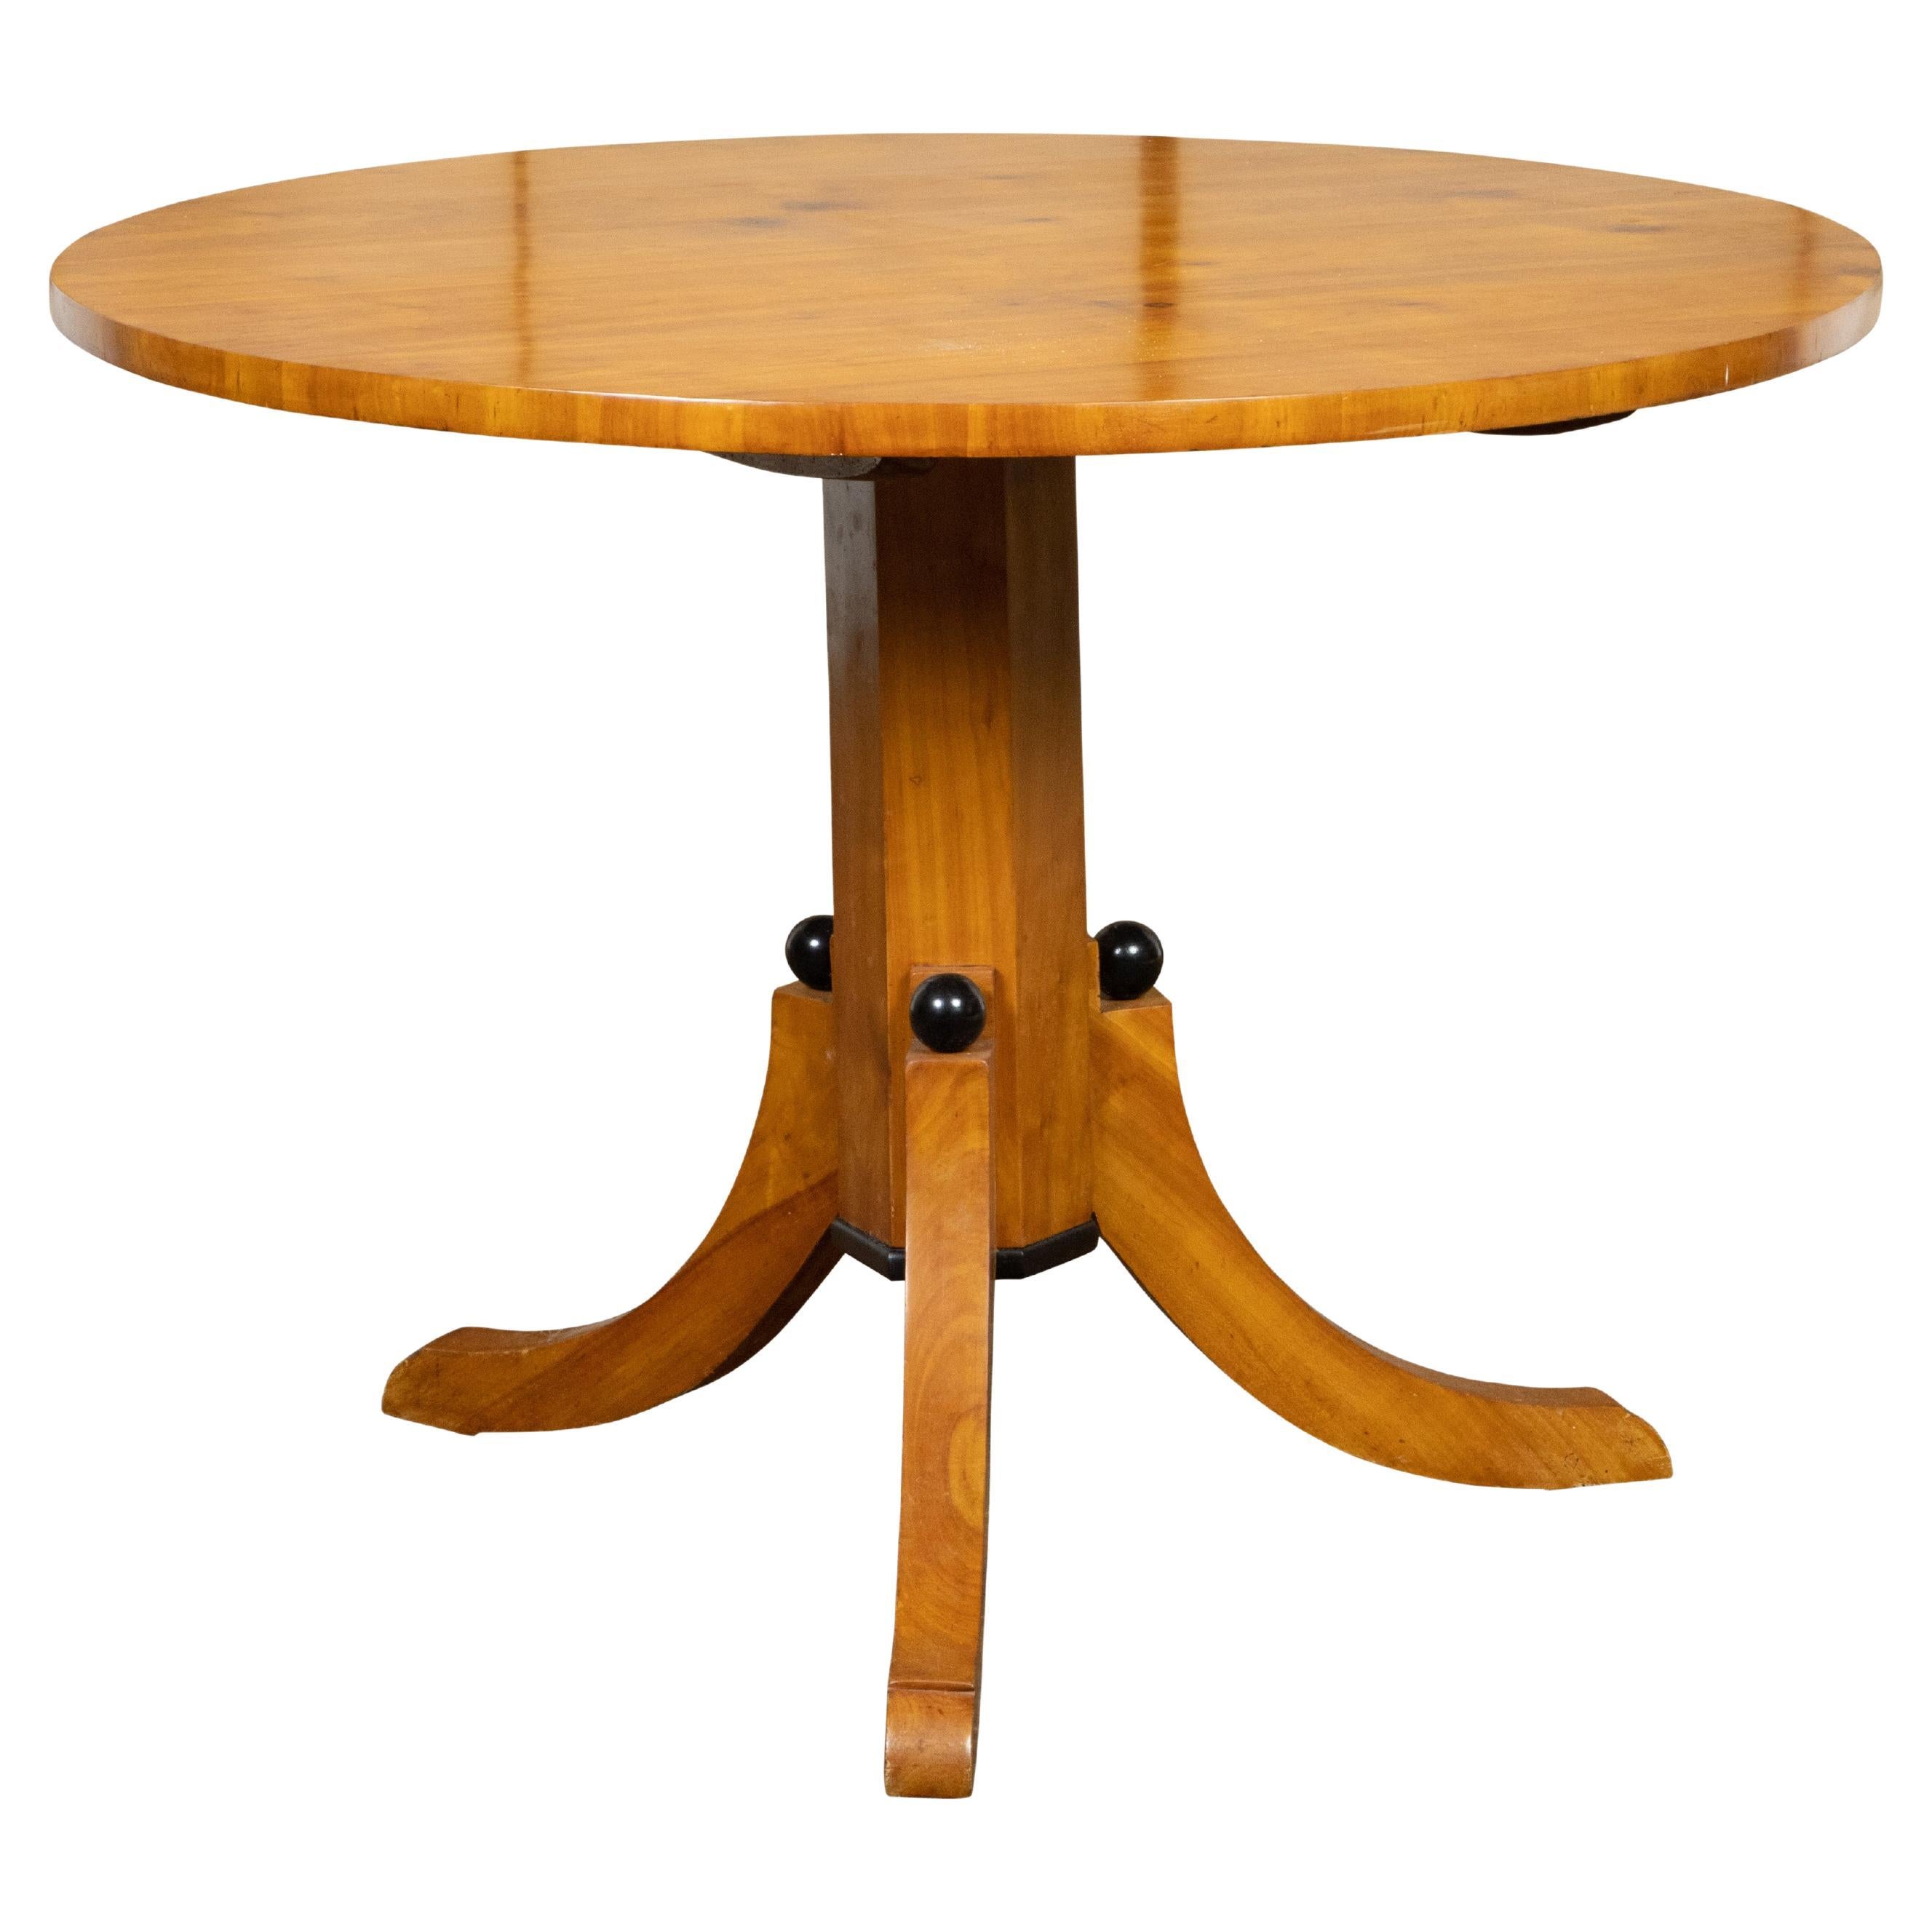 Biedermeier Period 19th Century Pine Center Table with Round Top and Tripod Base For Sale